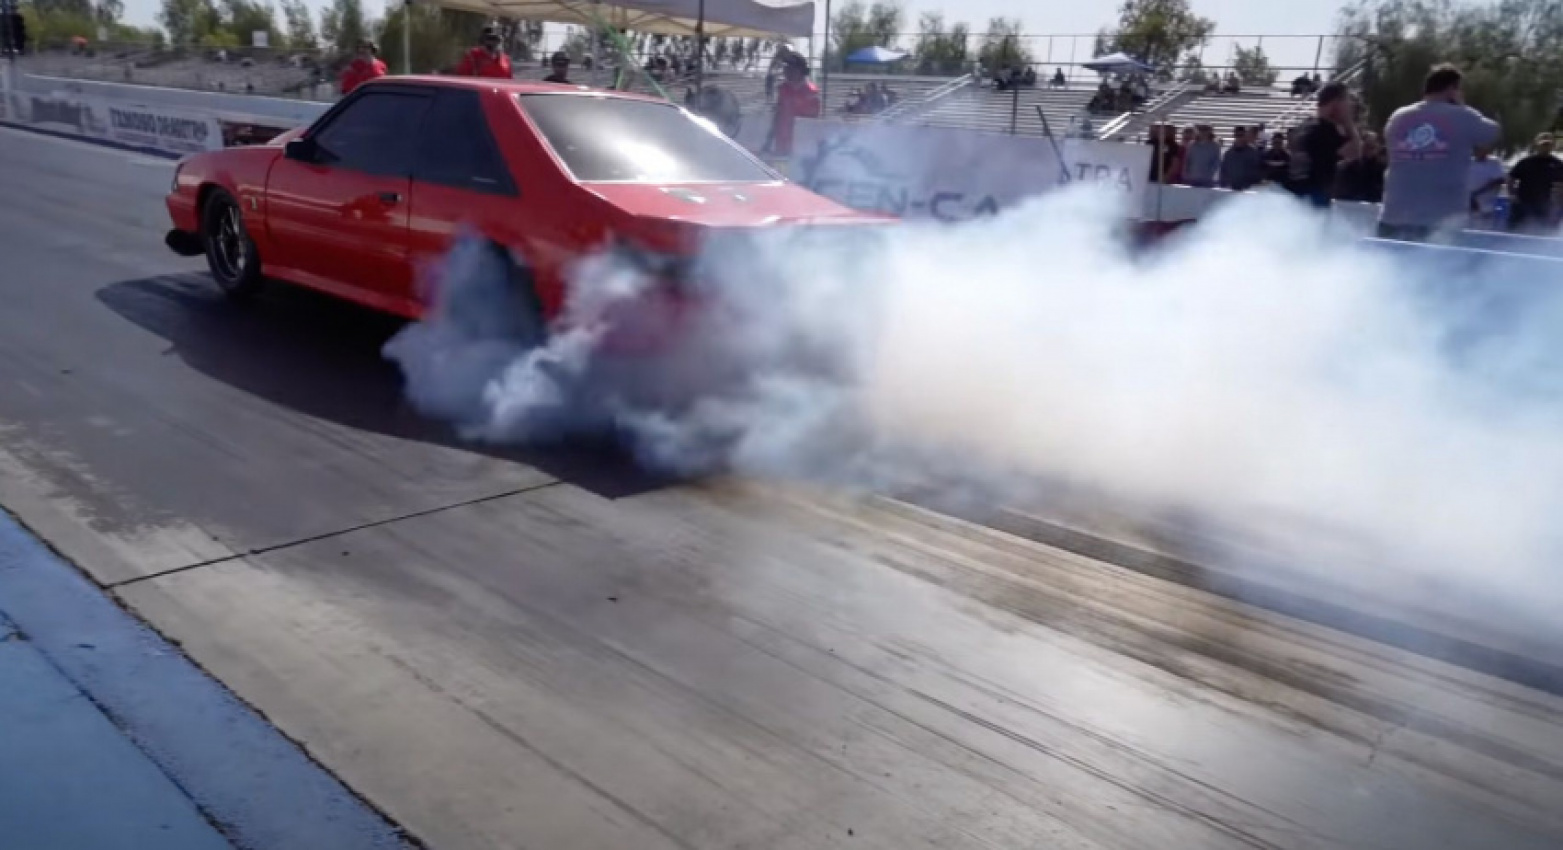 autos, cars, american, asian, celebrity, classic, client, europe, exotic, features, handpicked, luxury, modern classic, muscle, news, newsletter, off-road, sports, trucks, vnex, 1993 mustang cobra is a true drag racing legend